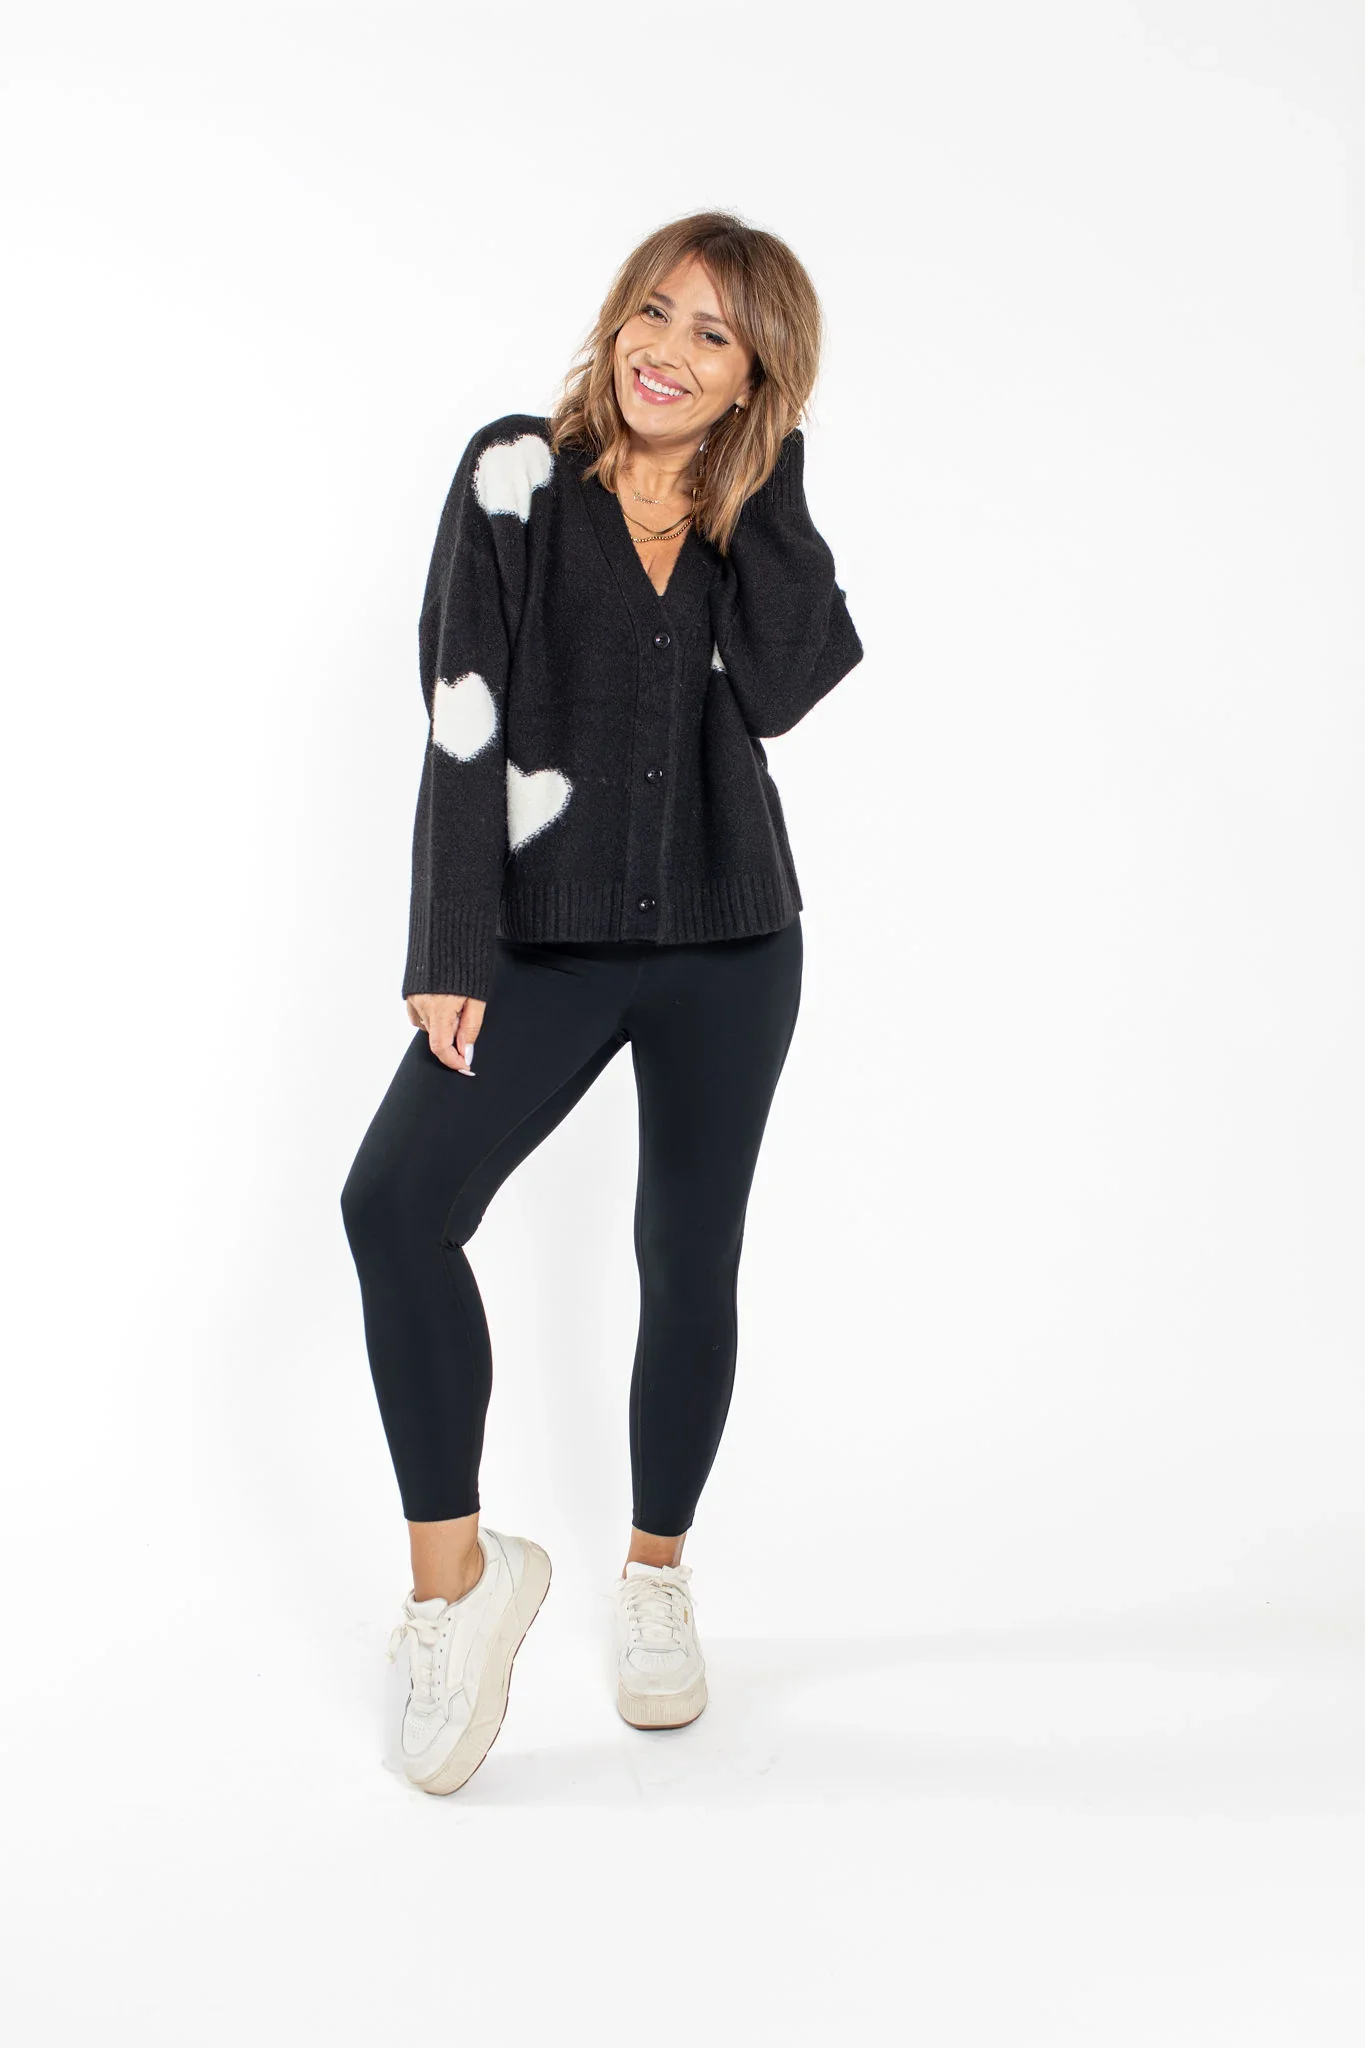 Image of Eloise Heart Cardigan in Black Combo